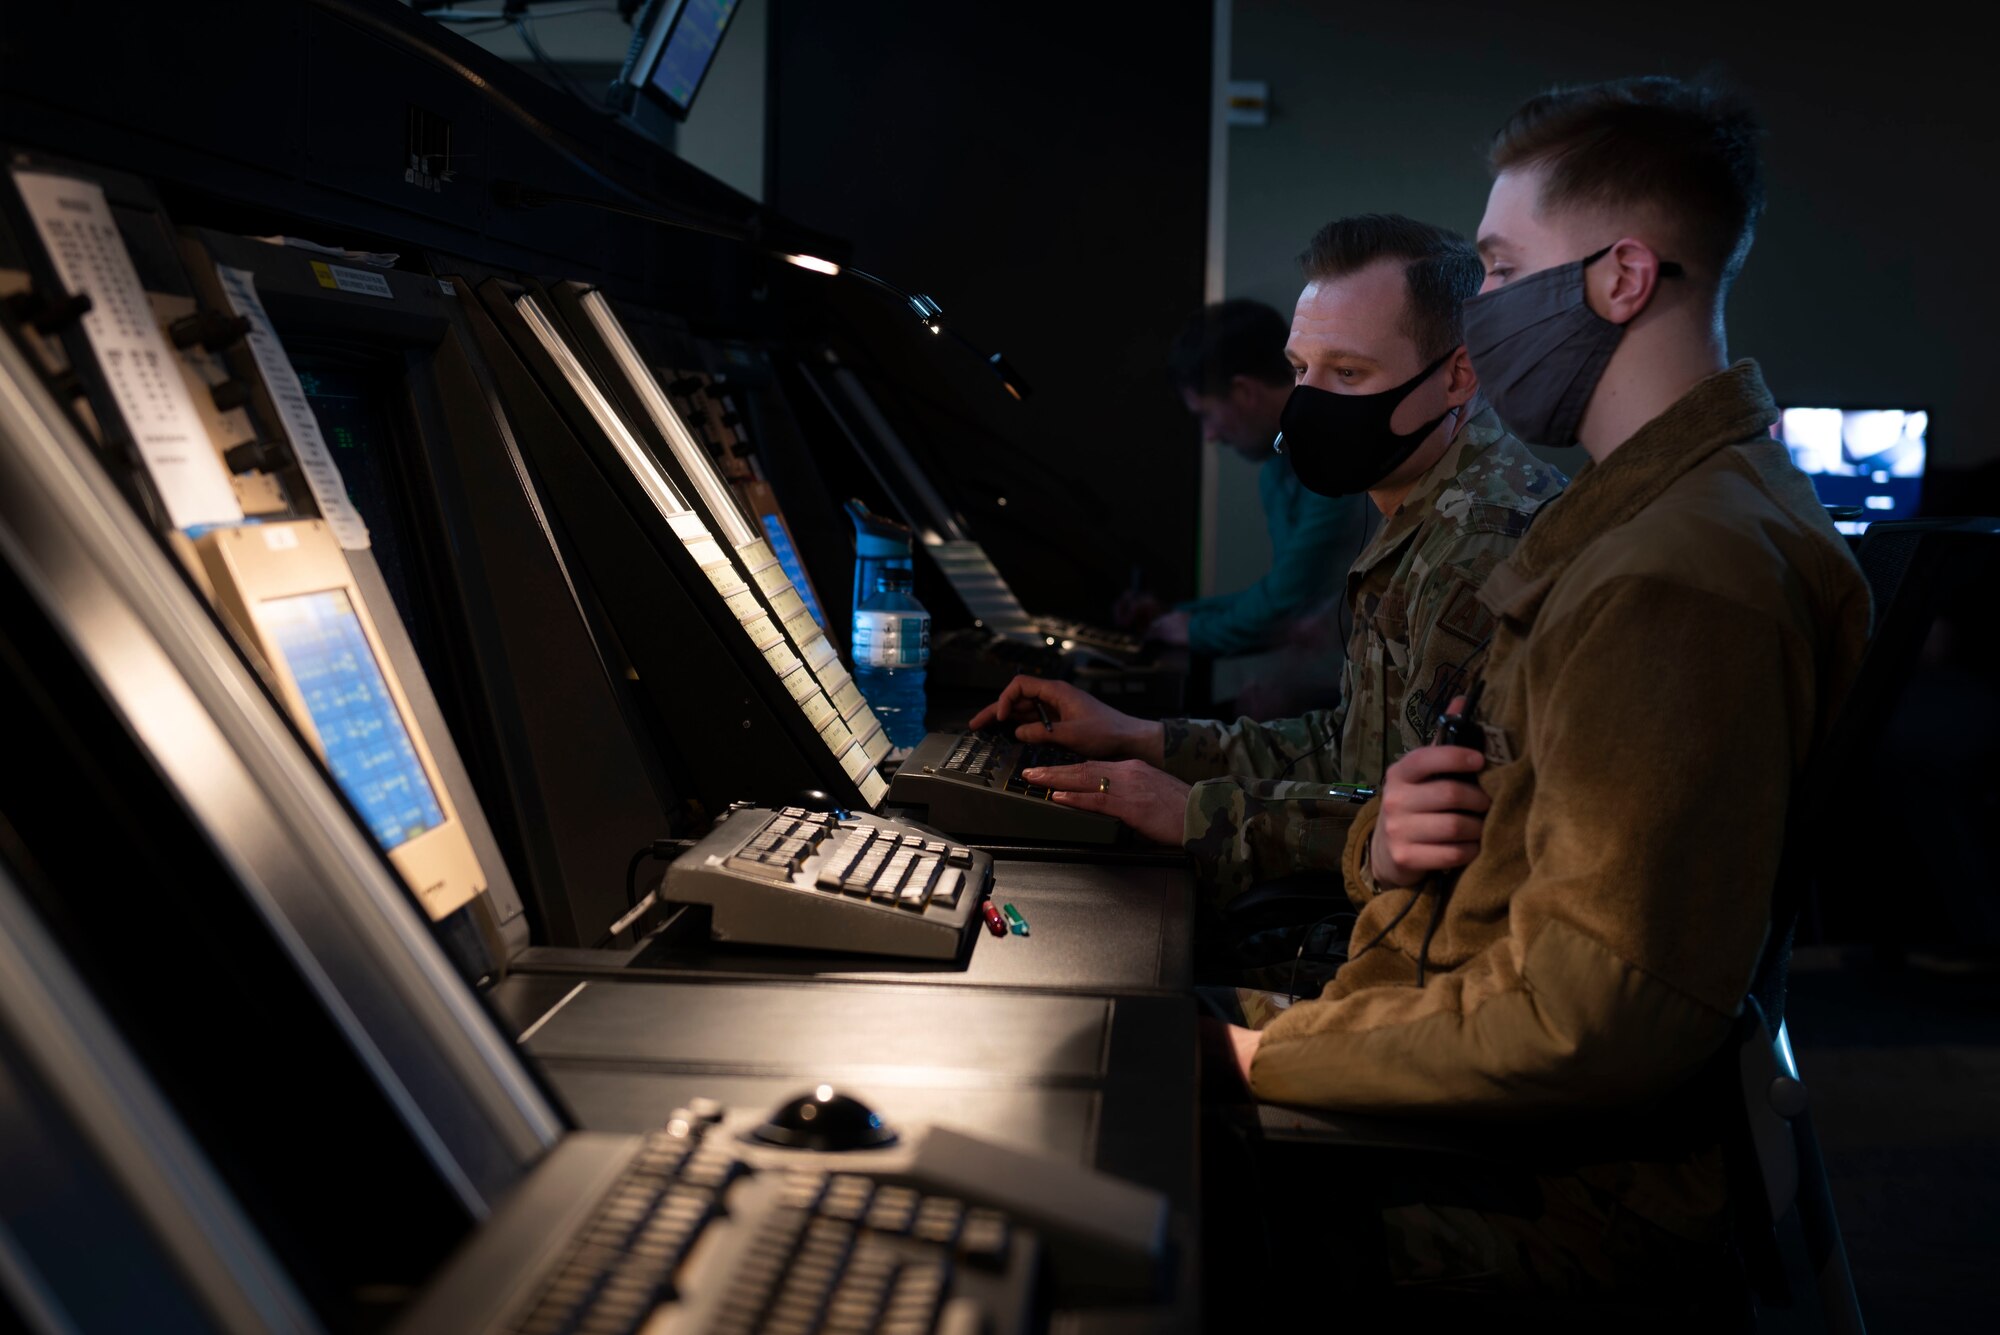 Tech. Sgt. Paul Imm, left, 4th Operations Support Squadron NCO in charge of standardization and evacuation, and Airman 1st Class Zachary Stoltzmann, 4th OSS air traffic control specialist, monitor flight patterns at Seymour Johnson Air Force Base, North Carolina, Feb. 2, 2022. During emergency situations controllers are able to help aircraft land by checking weather, landing space, and flight patterns. (U.S. Air Force photo by Airman 1st Class Sabrina Fuller)